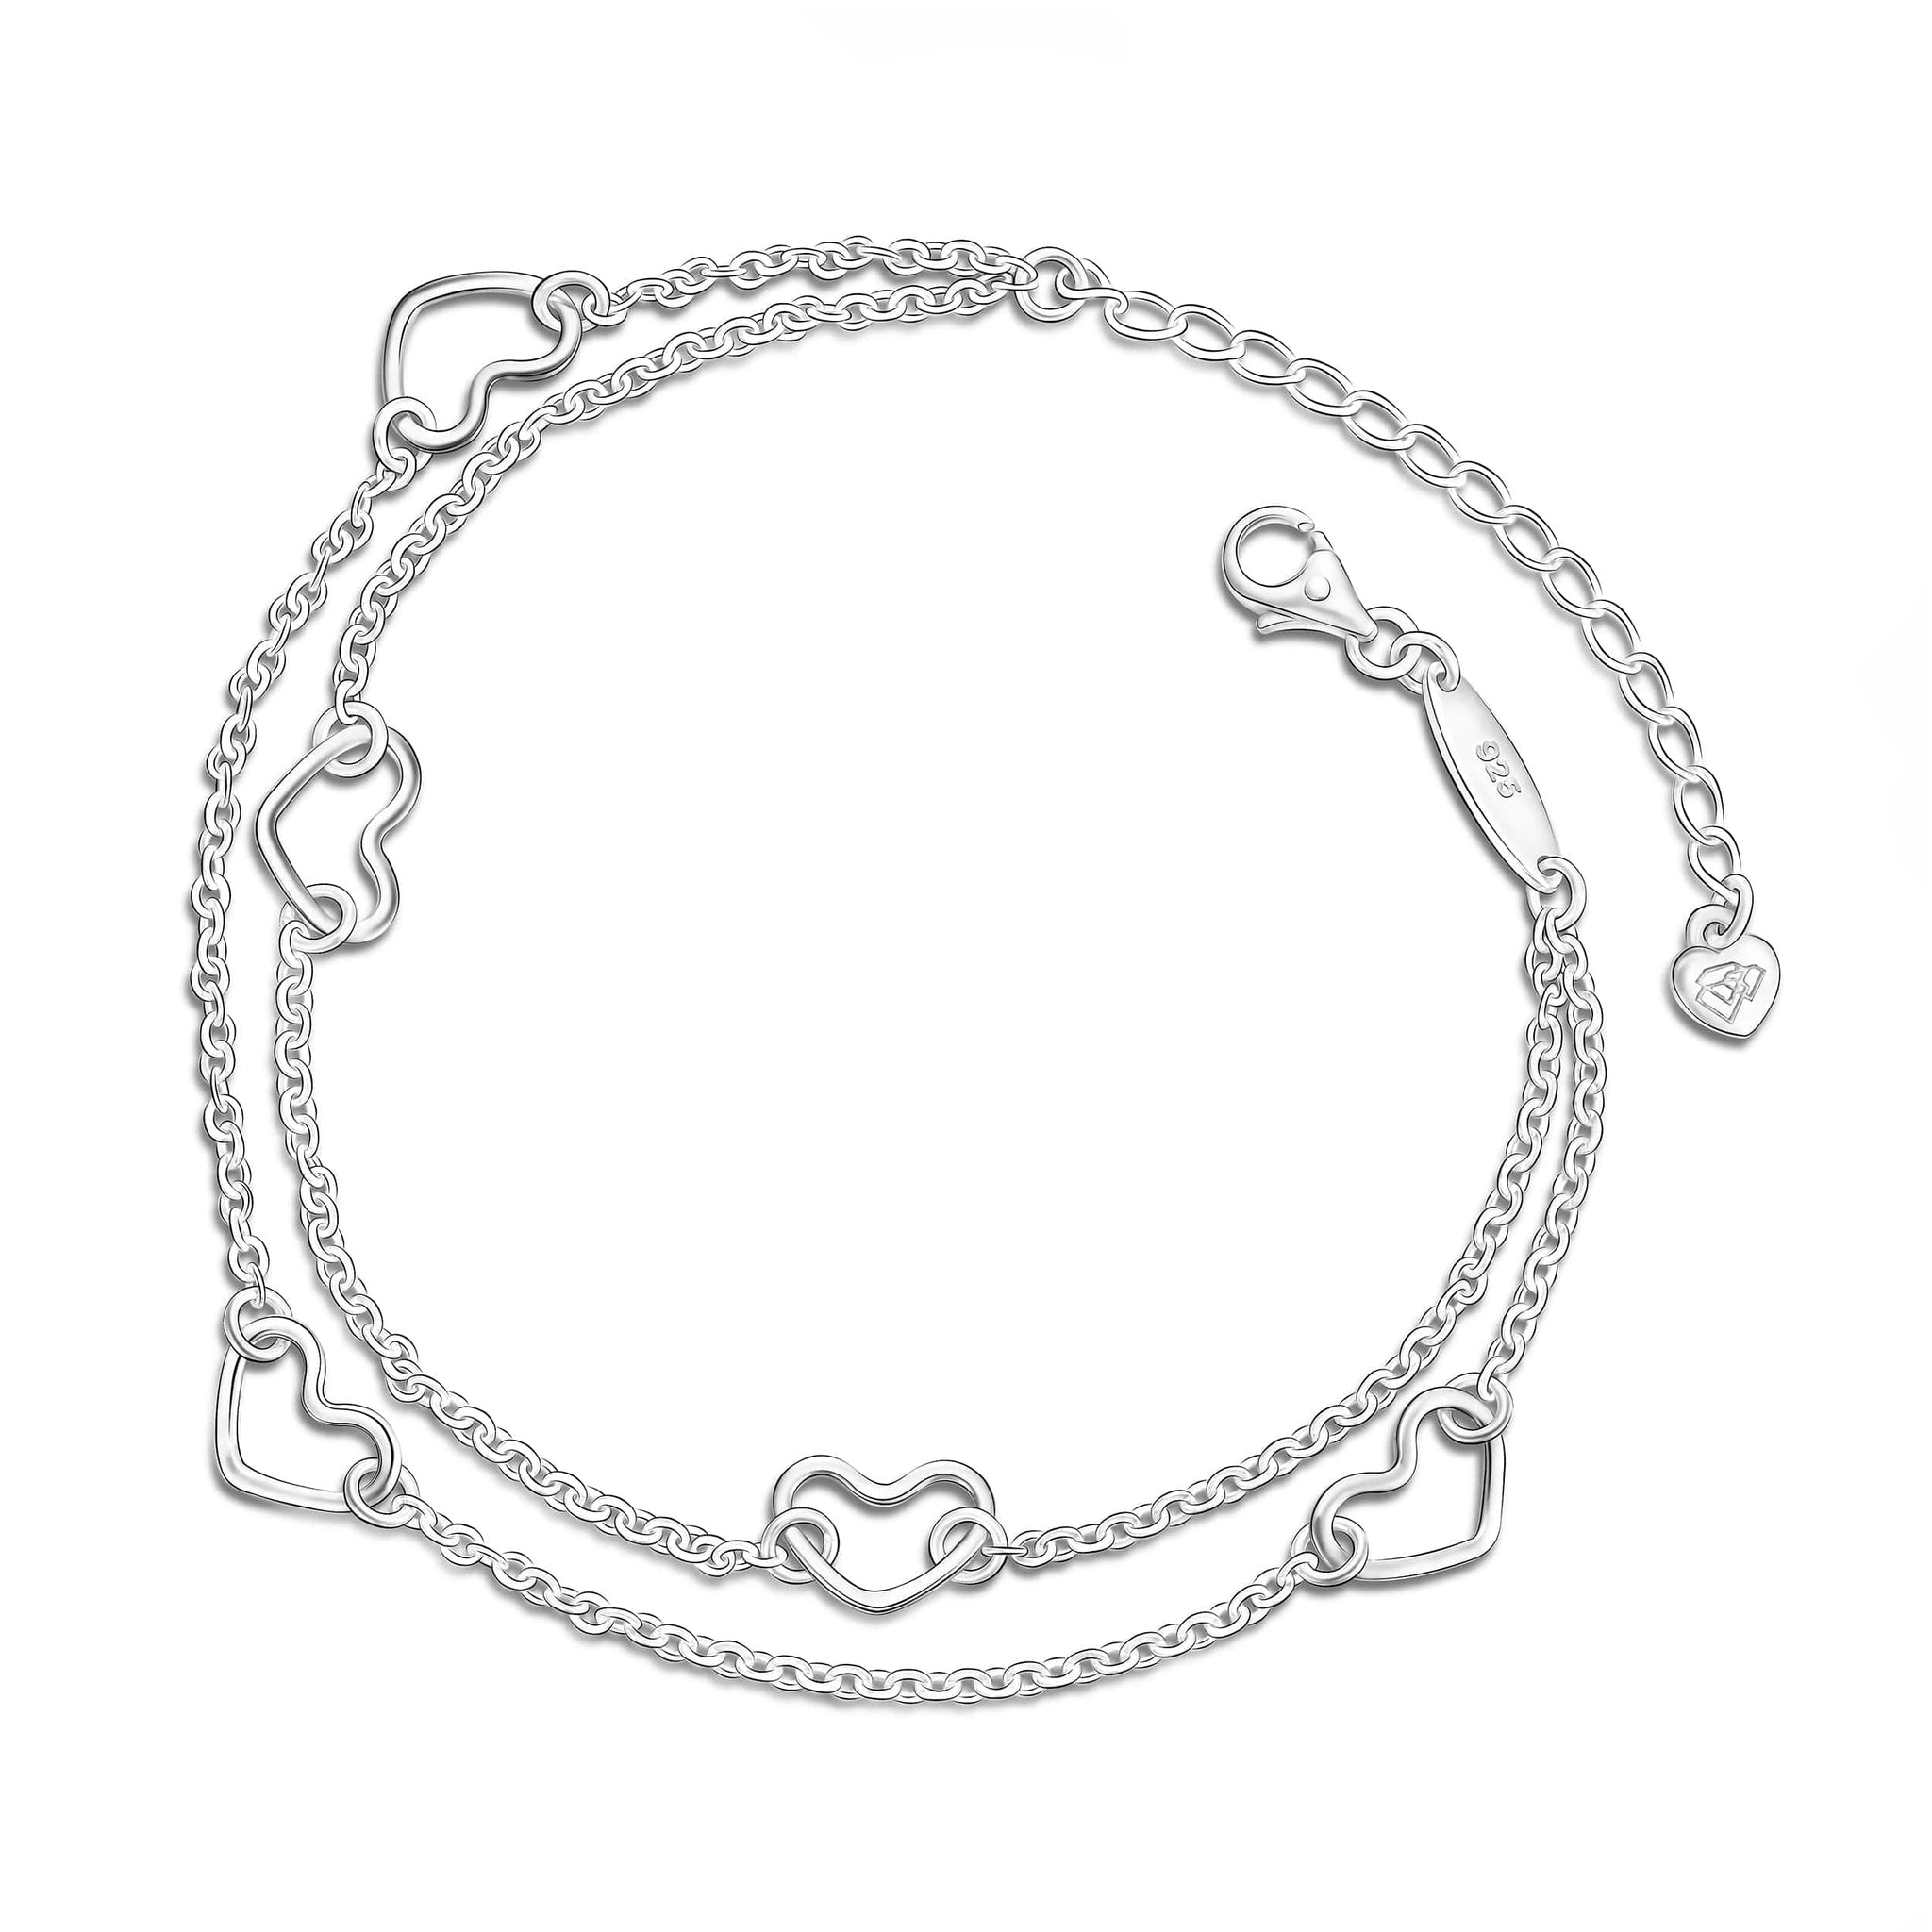 Sterling Forever Lock & Key Layered Necklace - Silver